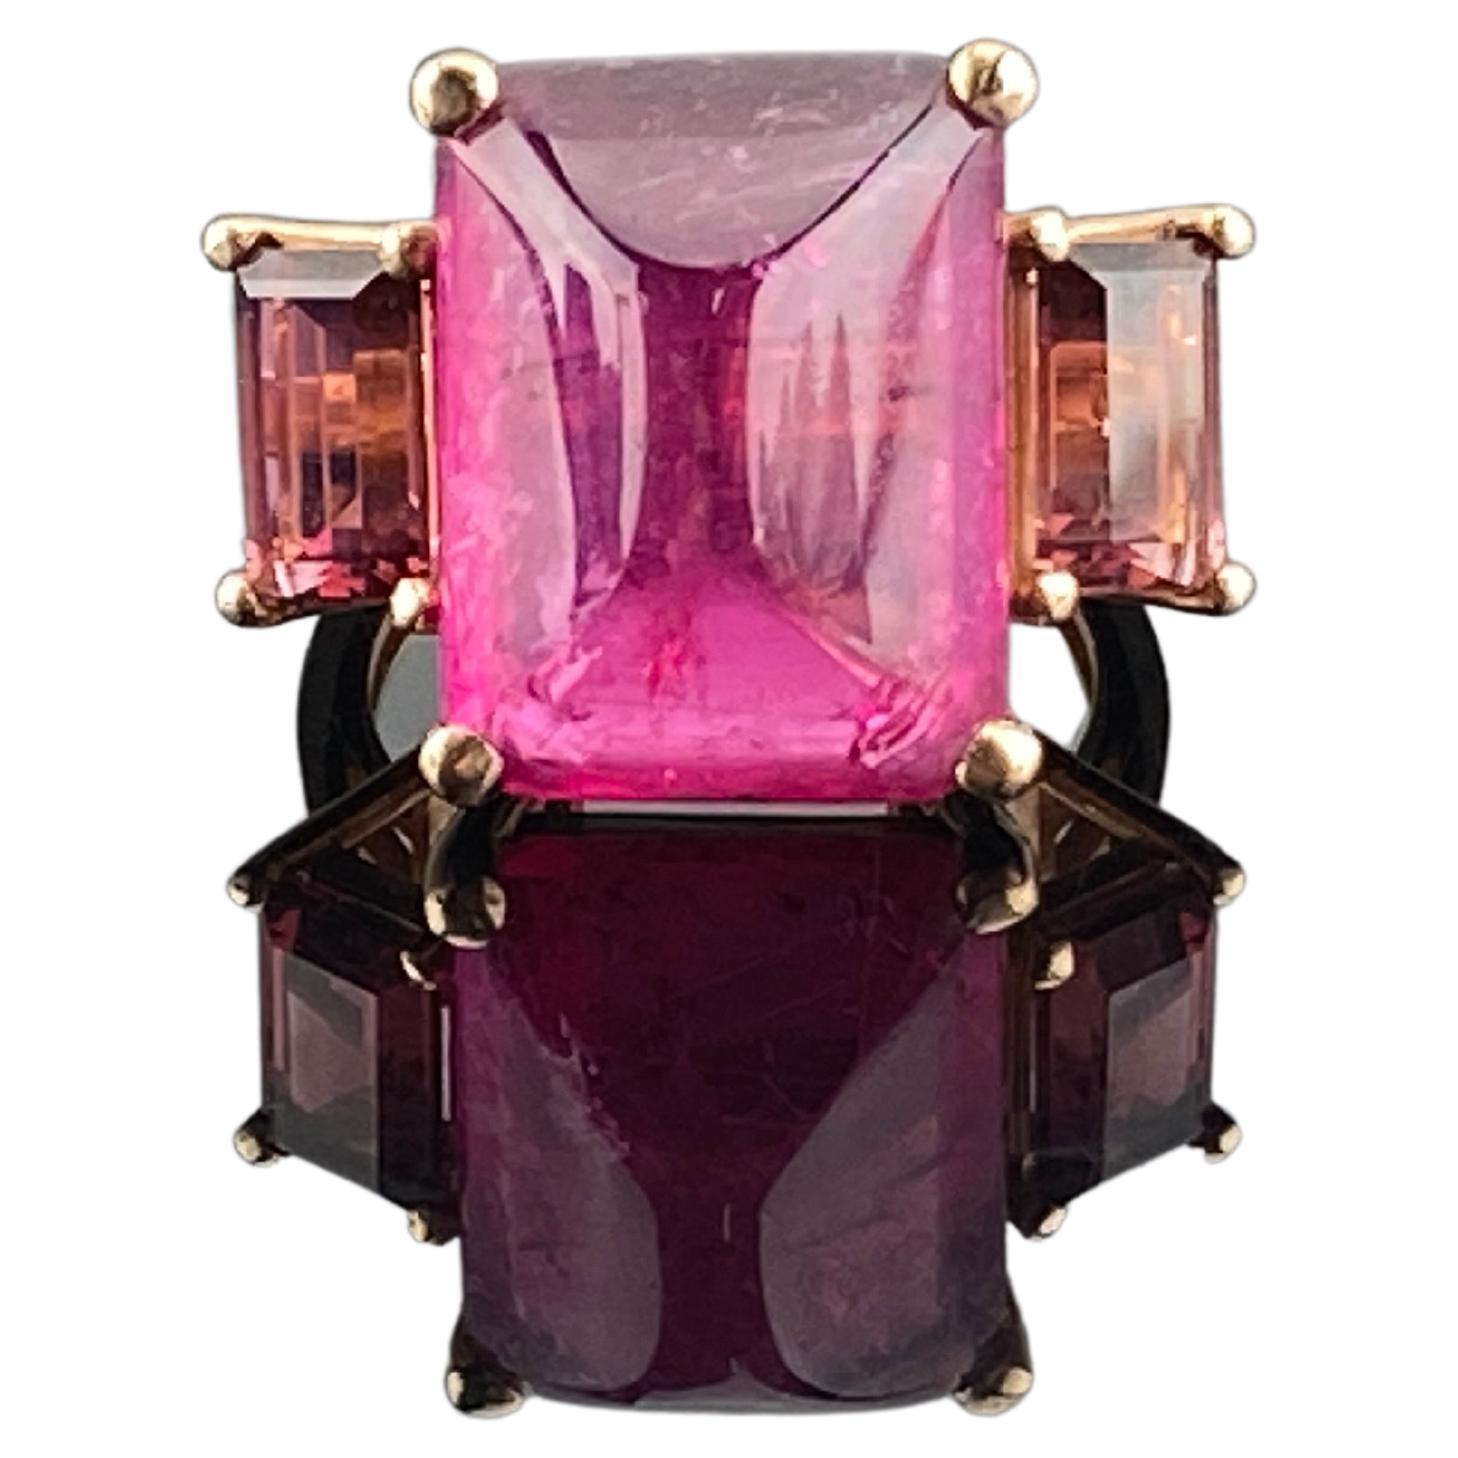 A beautiful, 14.53 carat Pink Tourmaline Ring with 2.85 carat Tourmaline side stones - all set in 18K Rose Gold. The simple, elegant design of the ring really enhances the beauty of the Gemstone, making it a one of a kind. The ring is currently